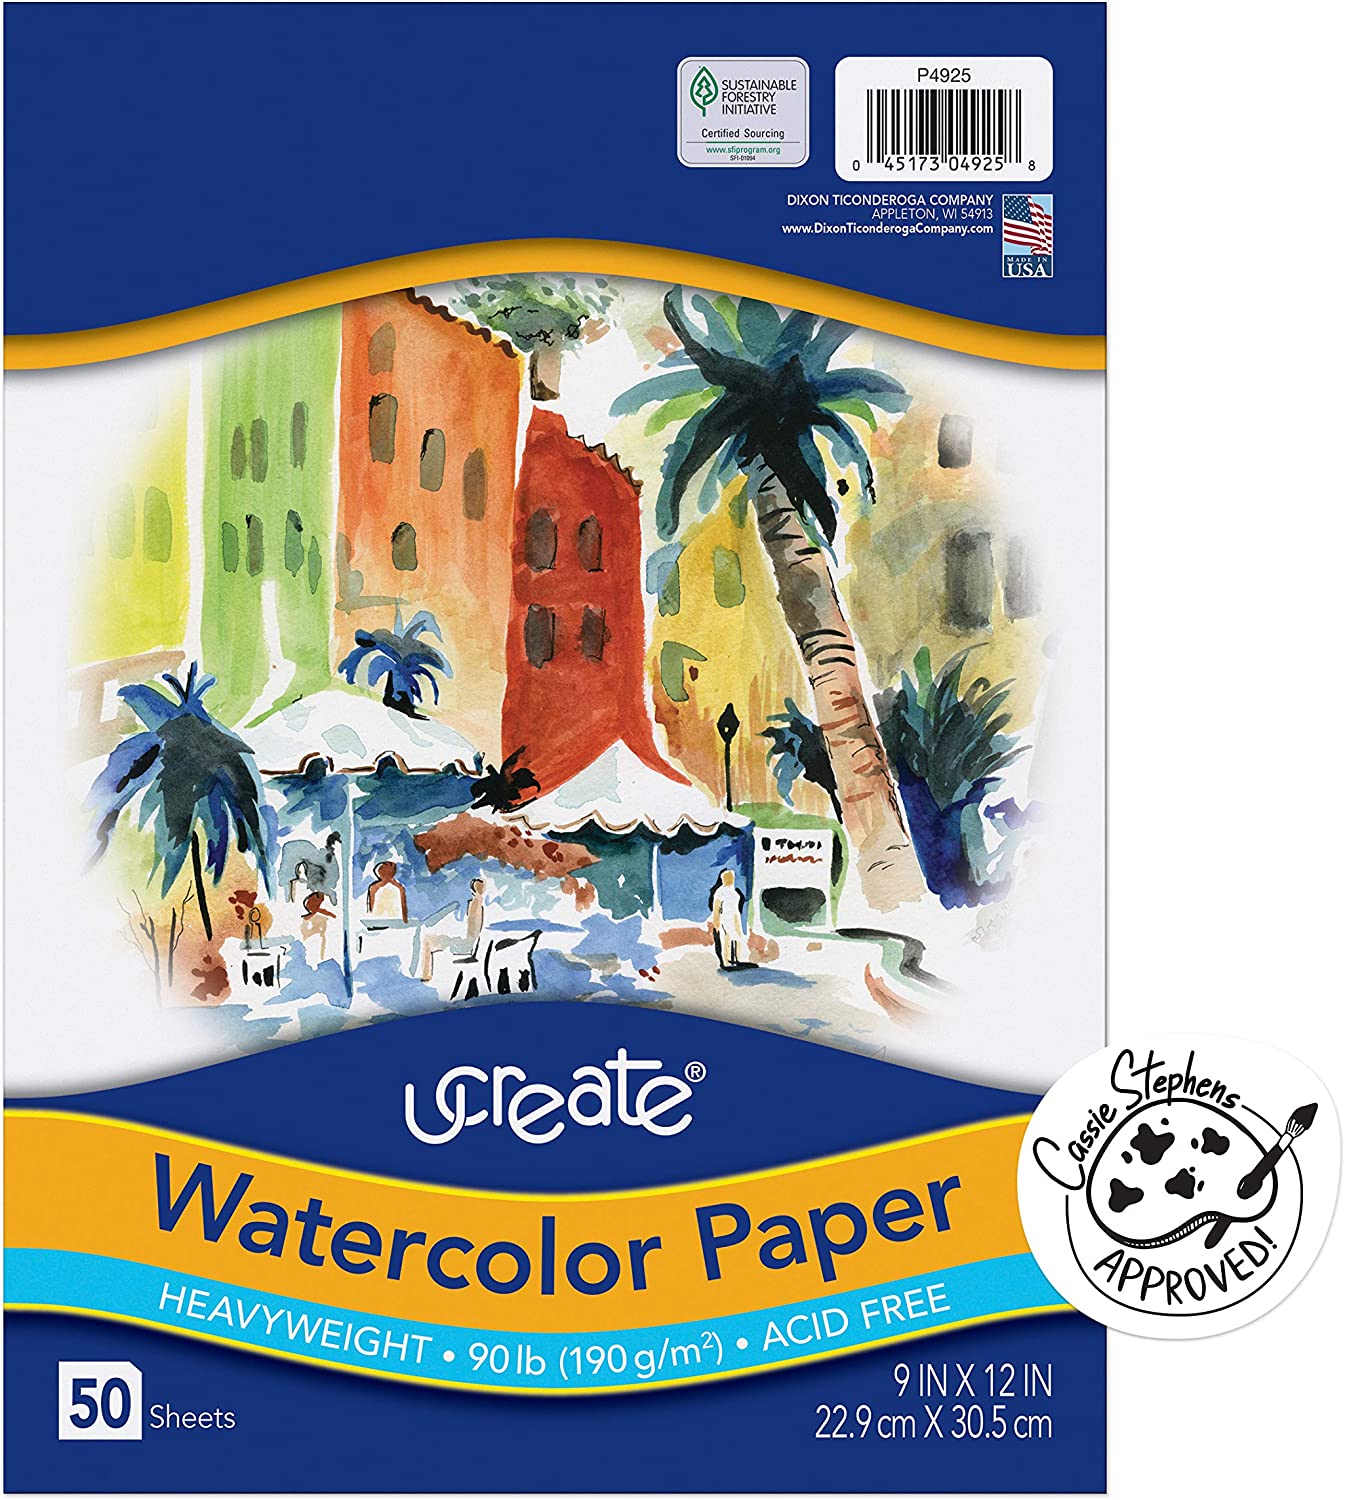 UCreate Watercolor Paper, White, Package, 90lb., 9″ x 12″, 50 Sheets